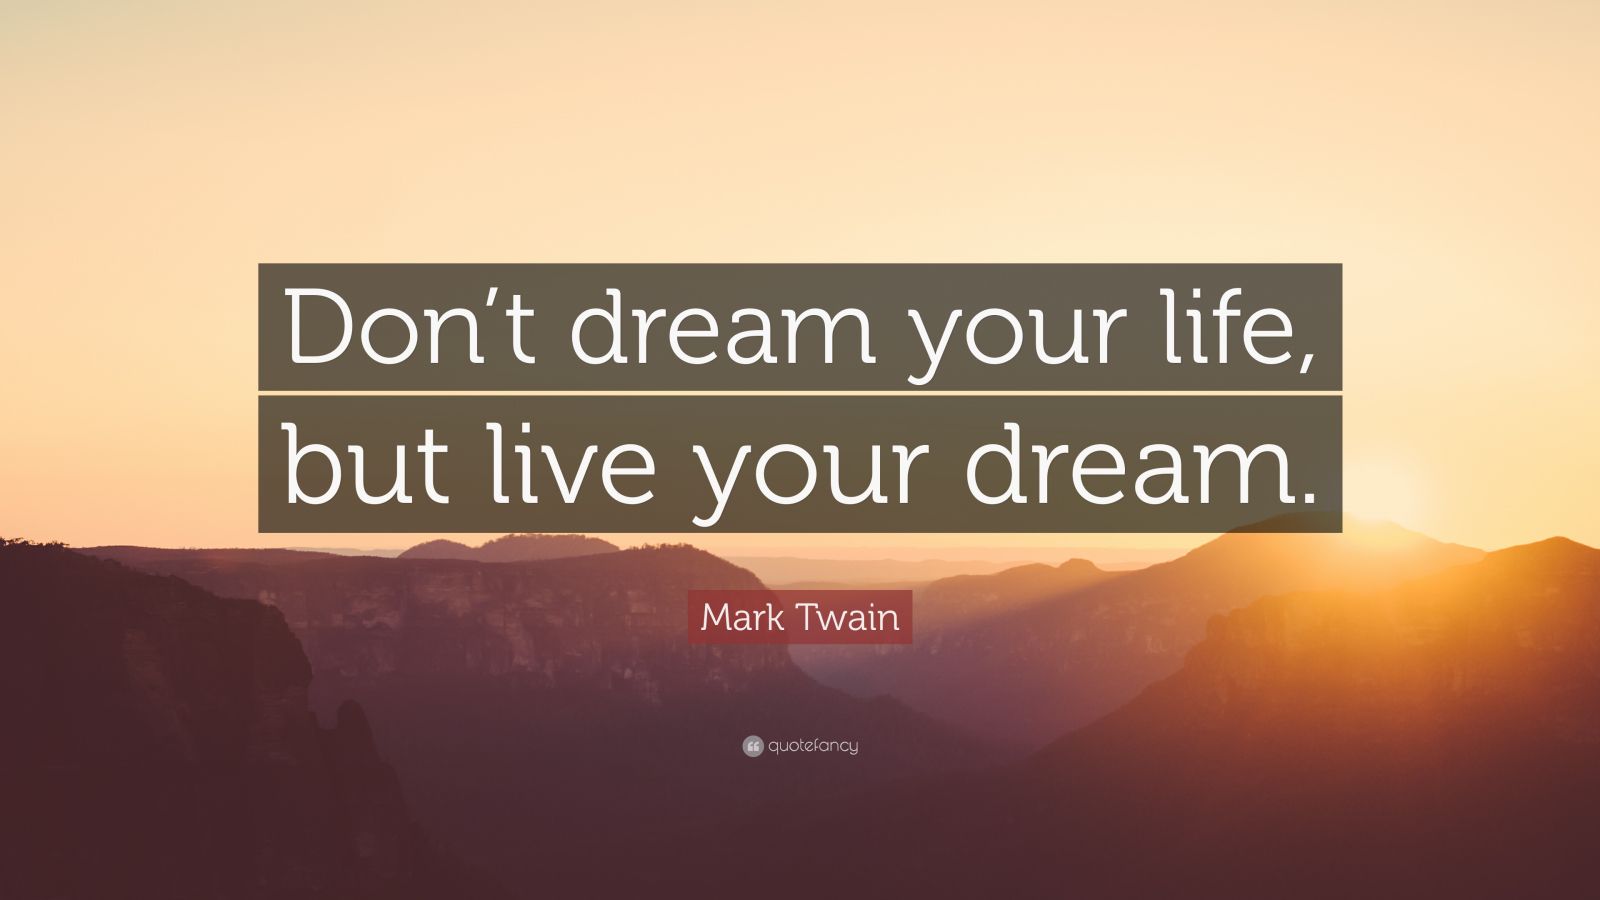 Mark Twain Quote: “Don’t dream your life, but live your dream.” (9